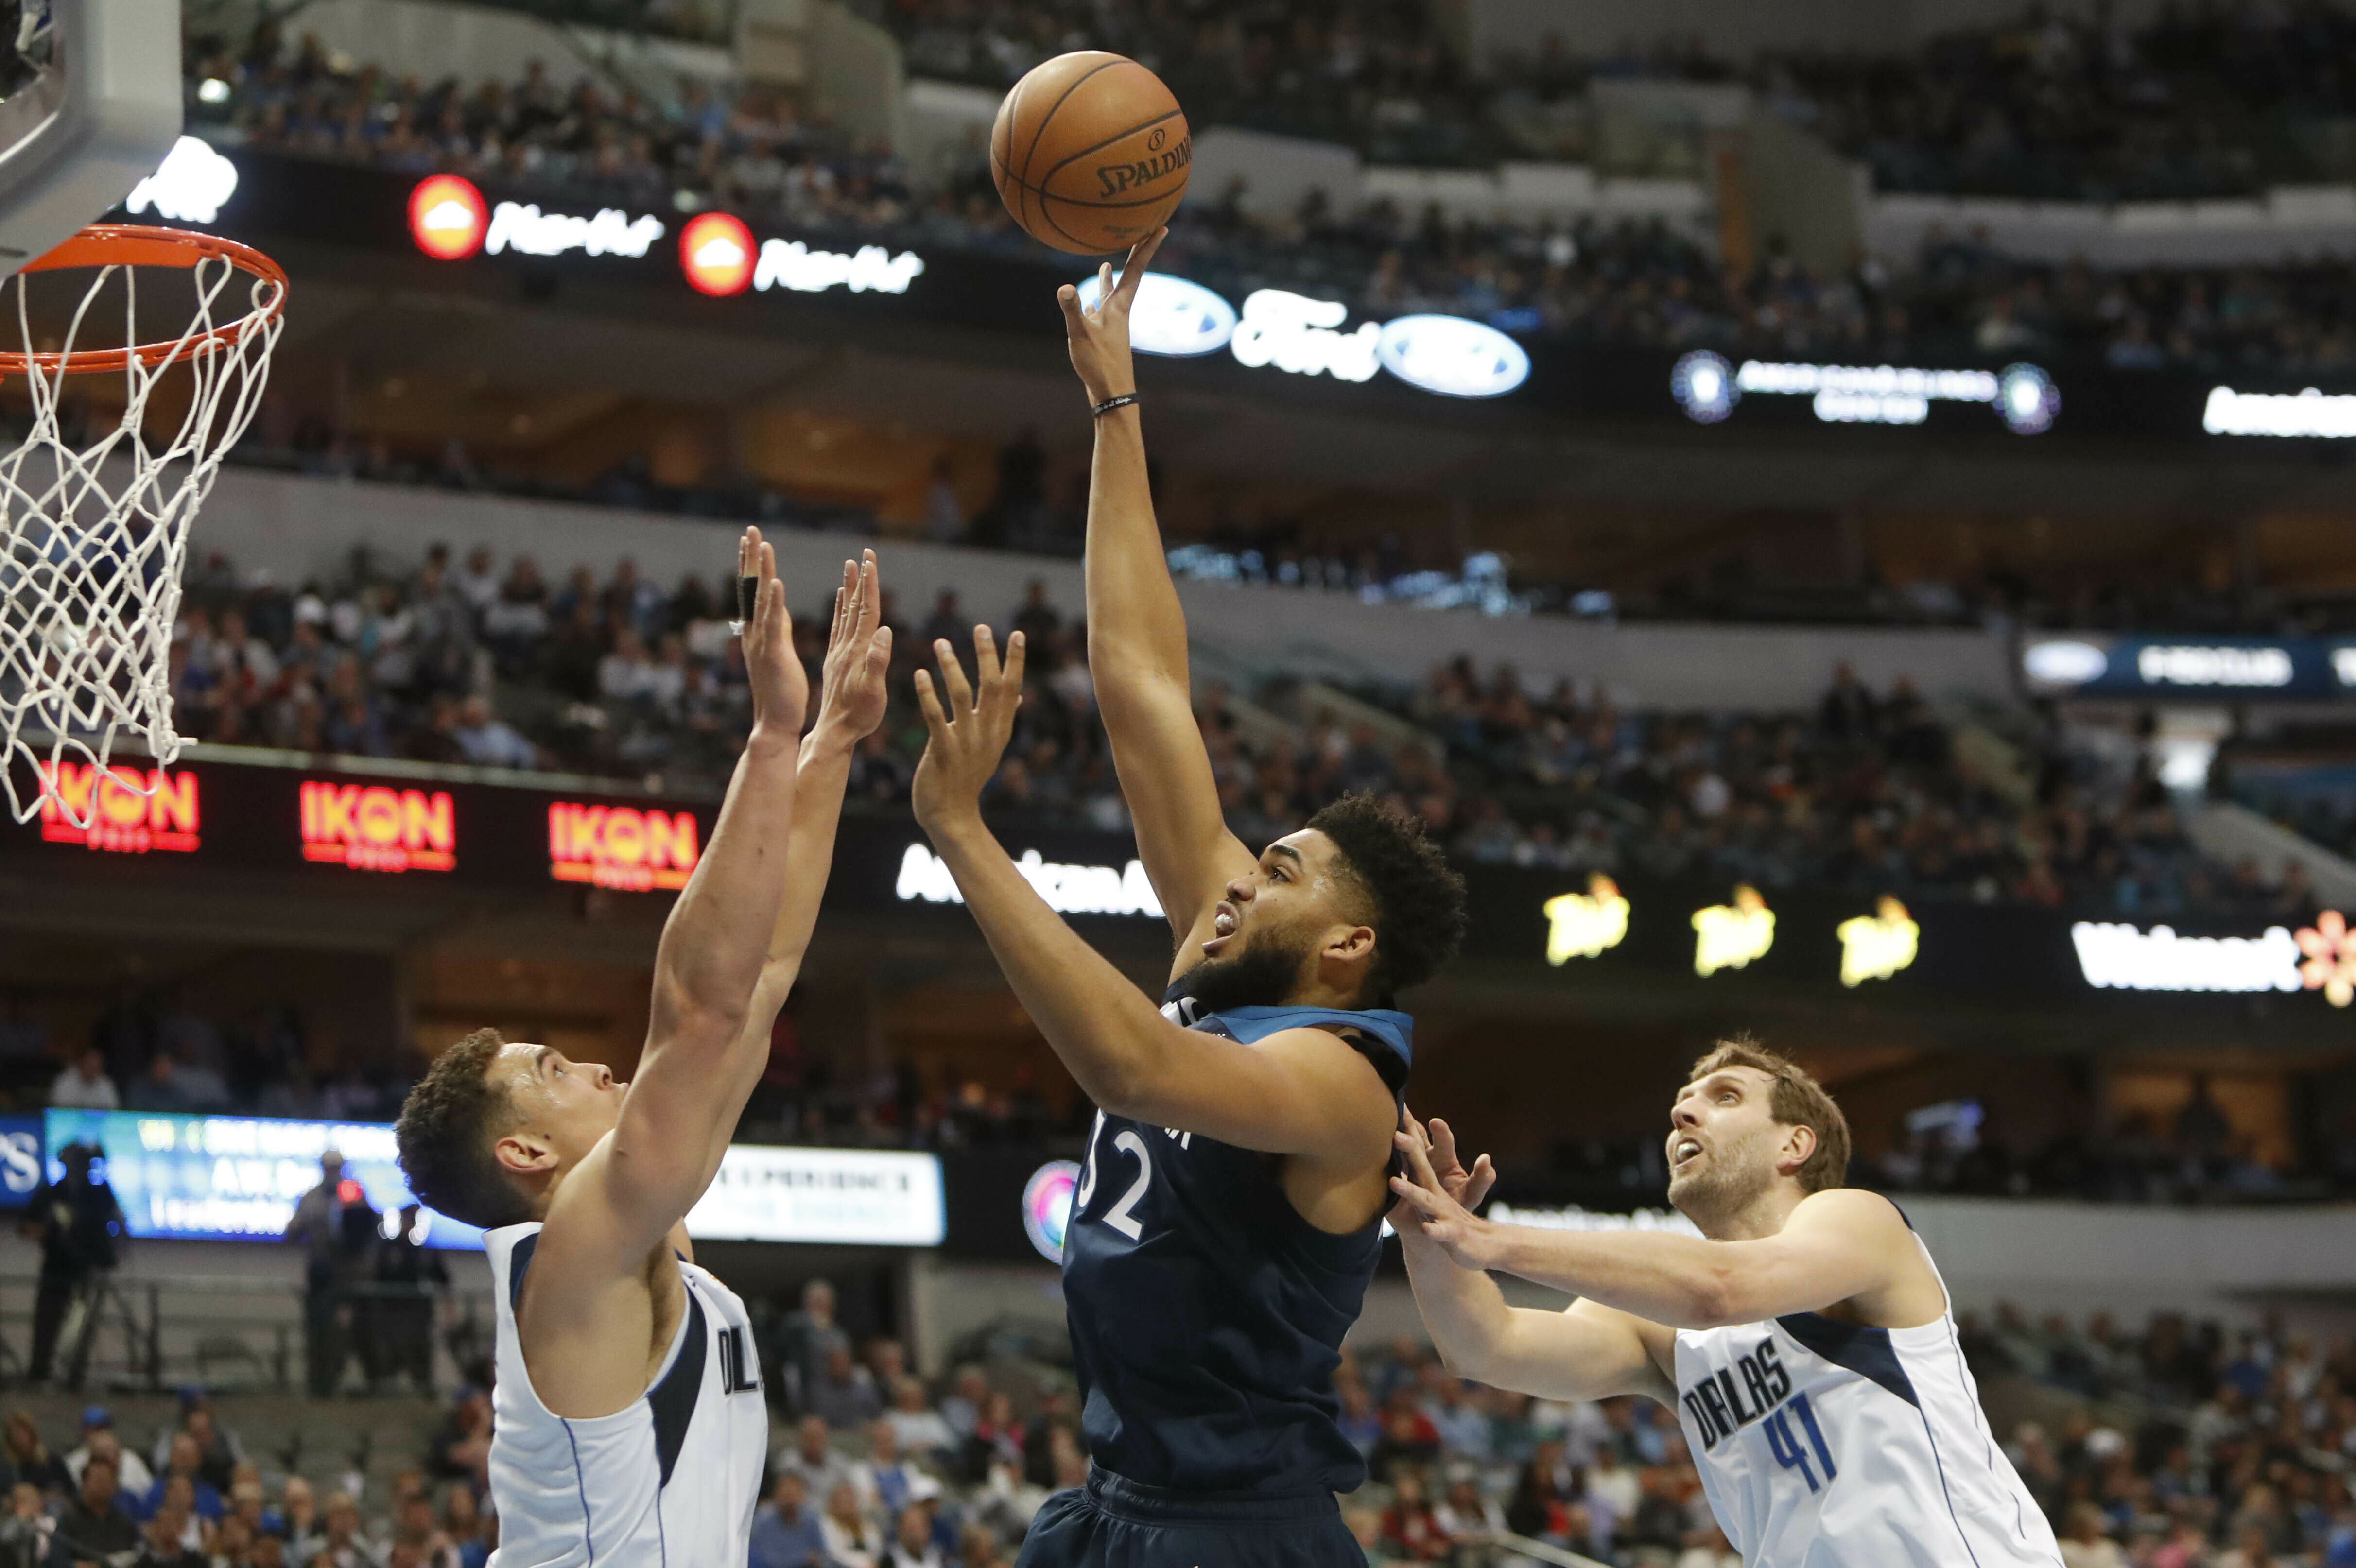 Towns, Wiggins help T-wolves turn away Mavs rally, 110-108